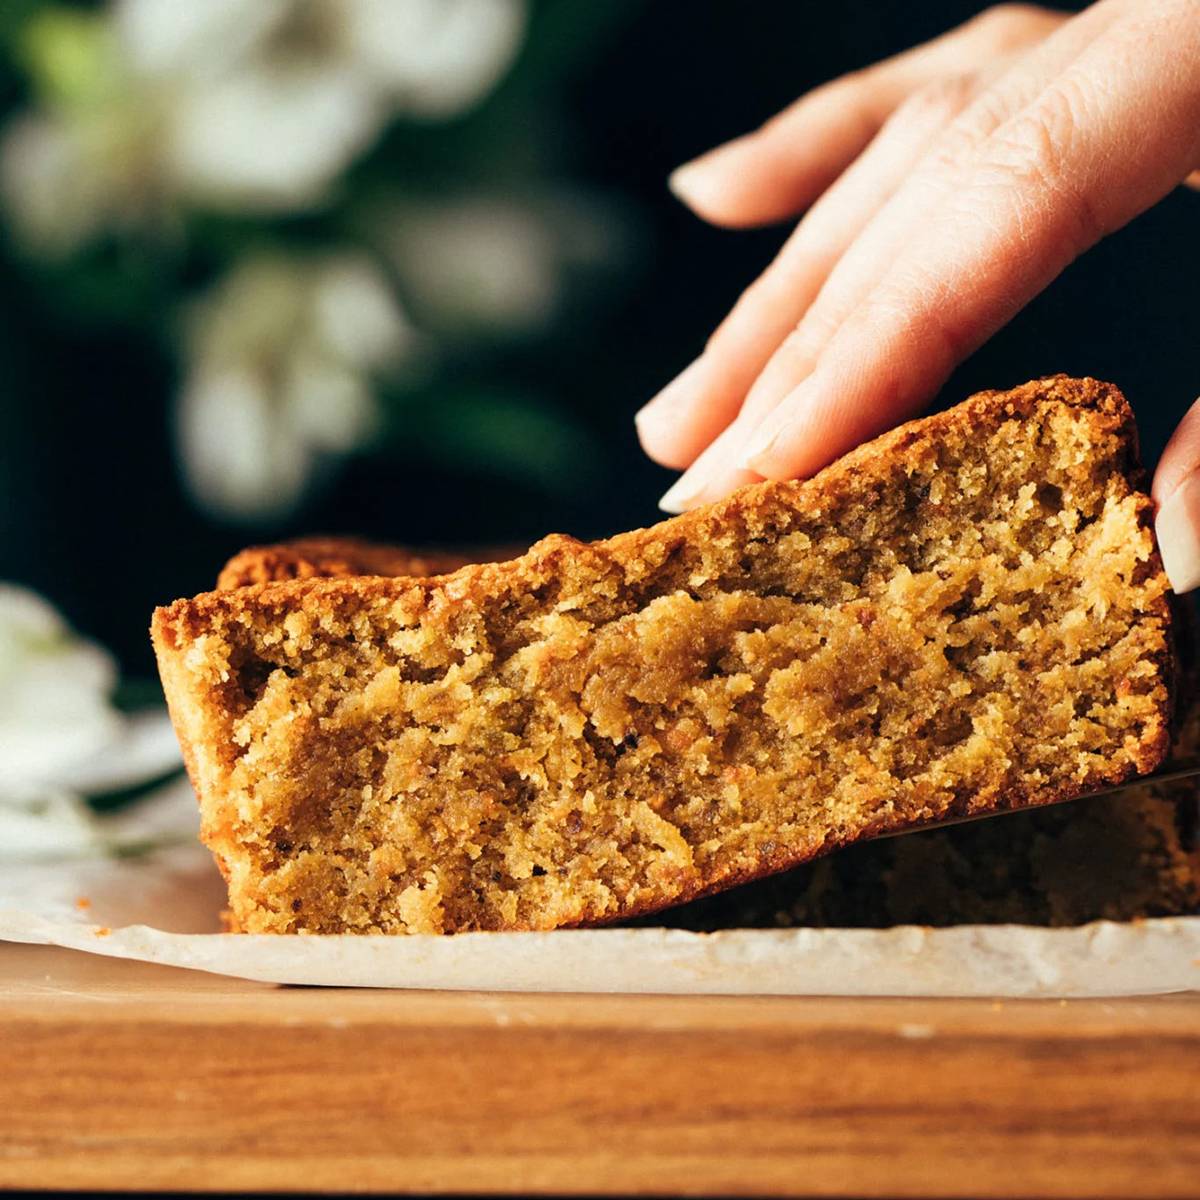 Pistachio loaf being held by white hand square